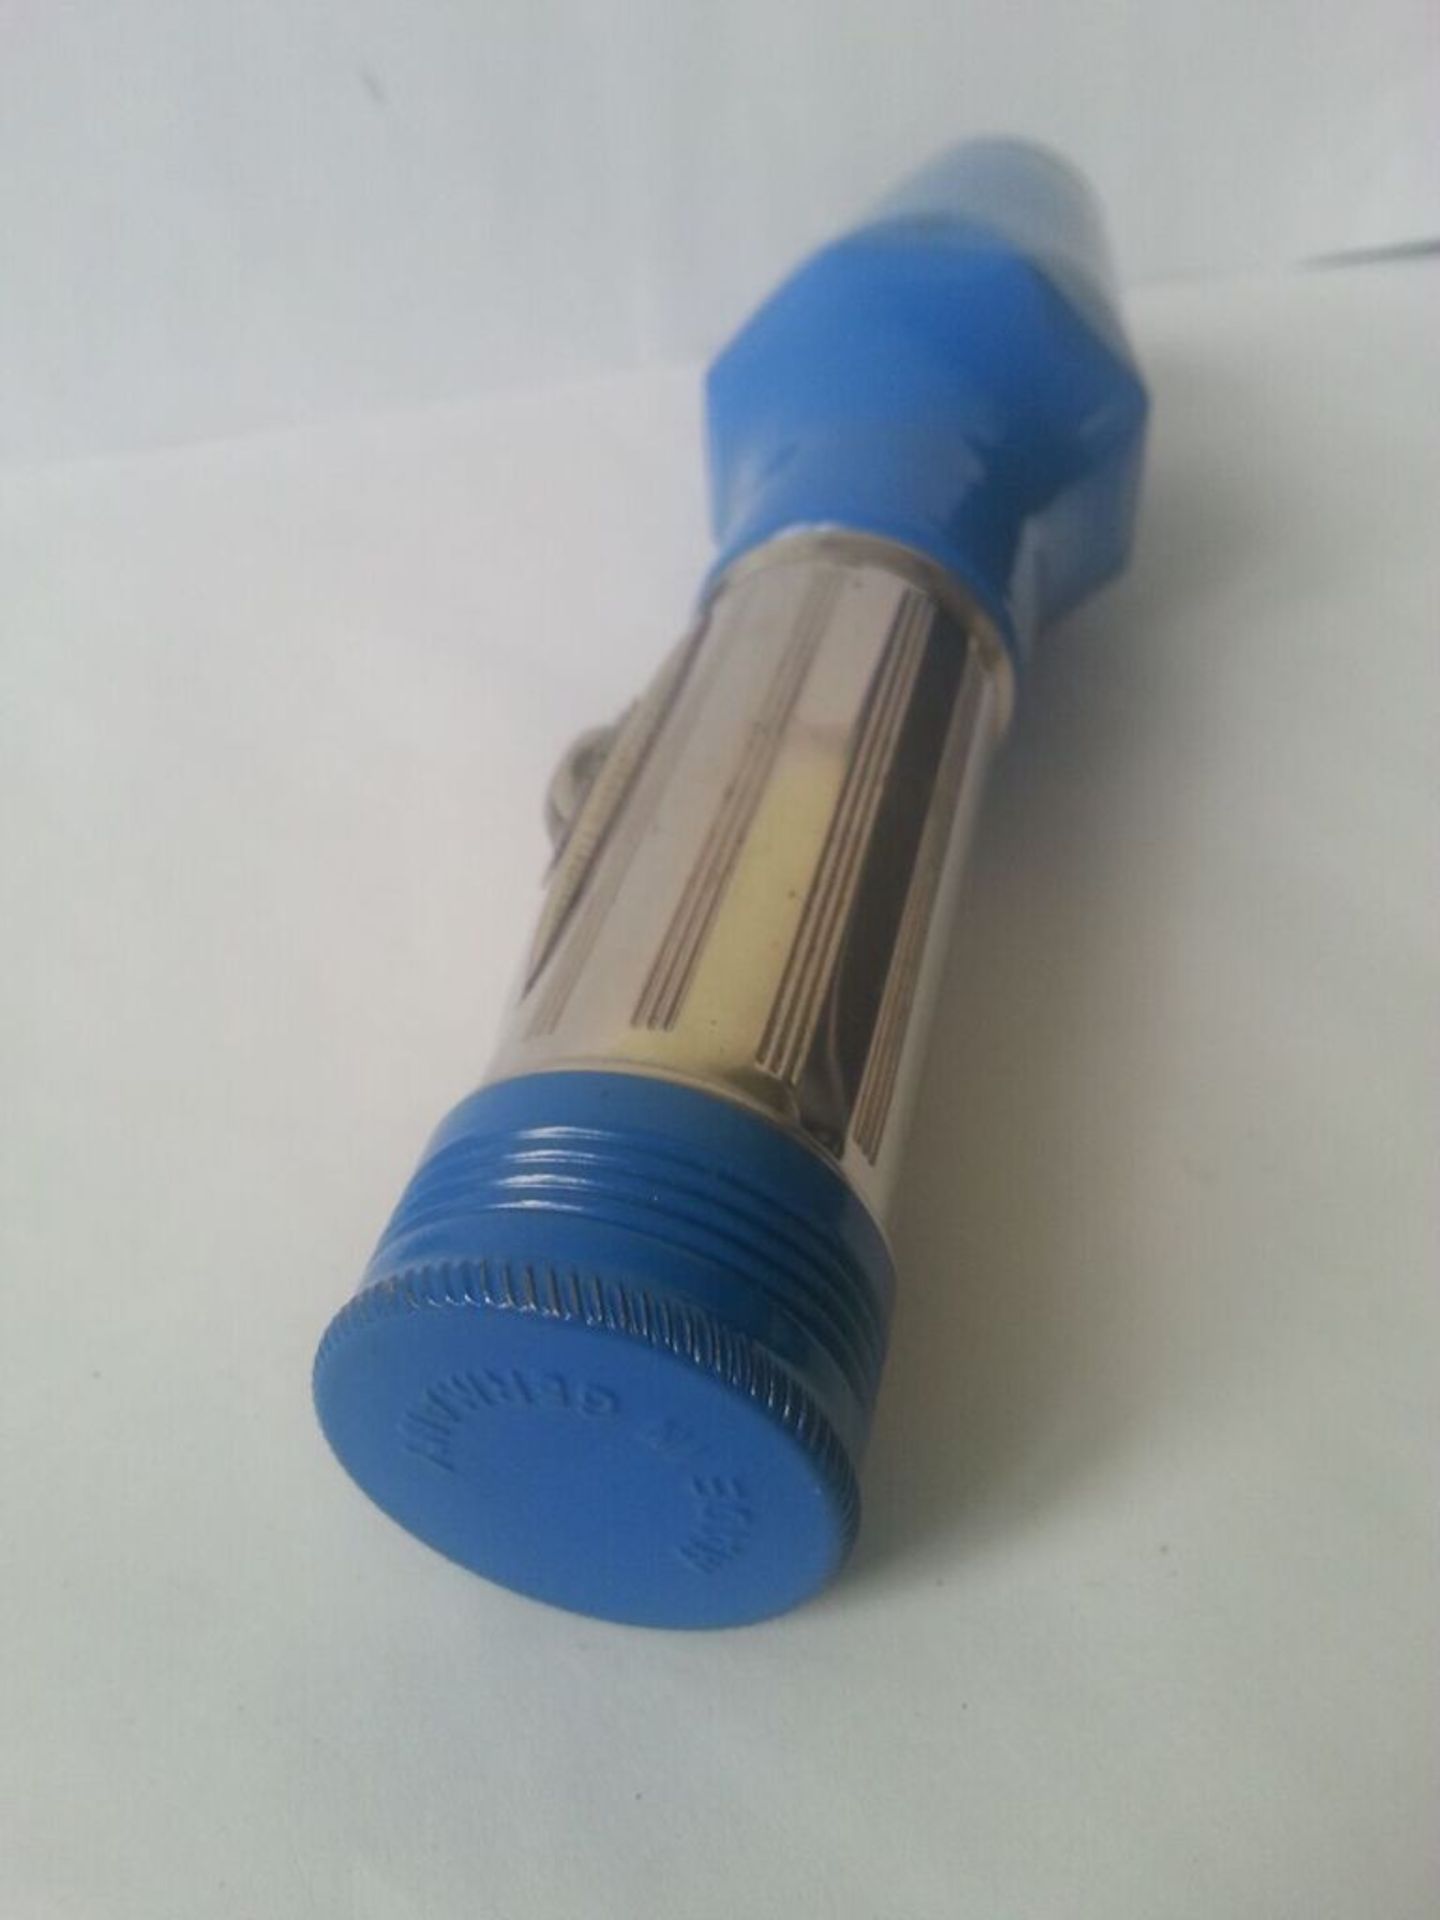 Vintage torch or flashlight, Made in Germany with screw top battery compartment. Probably Artas. - Image 2 of 2